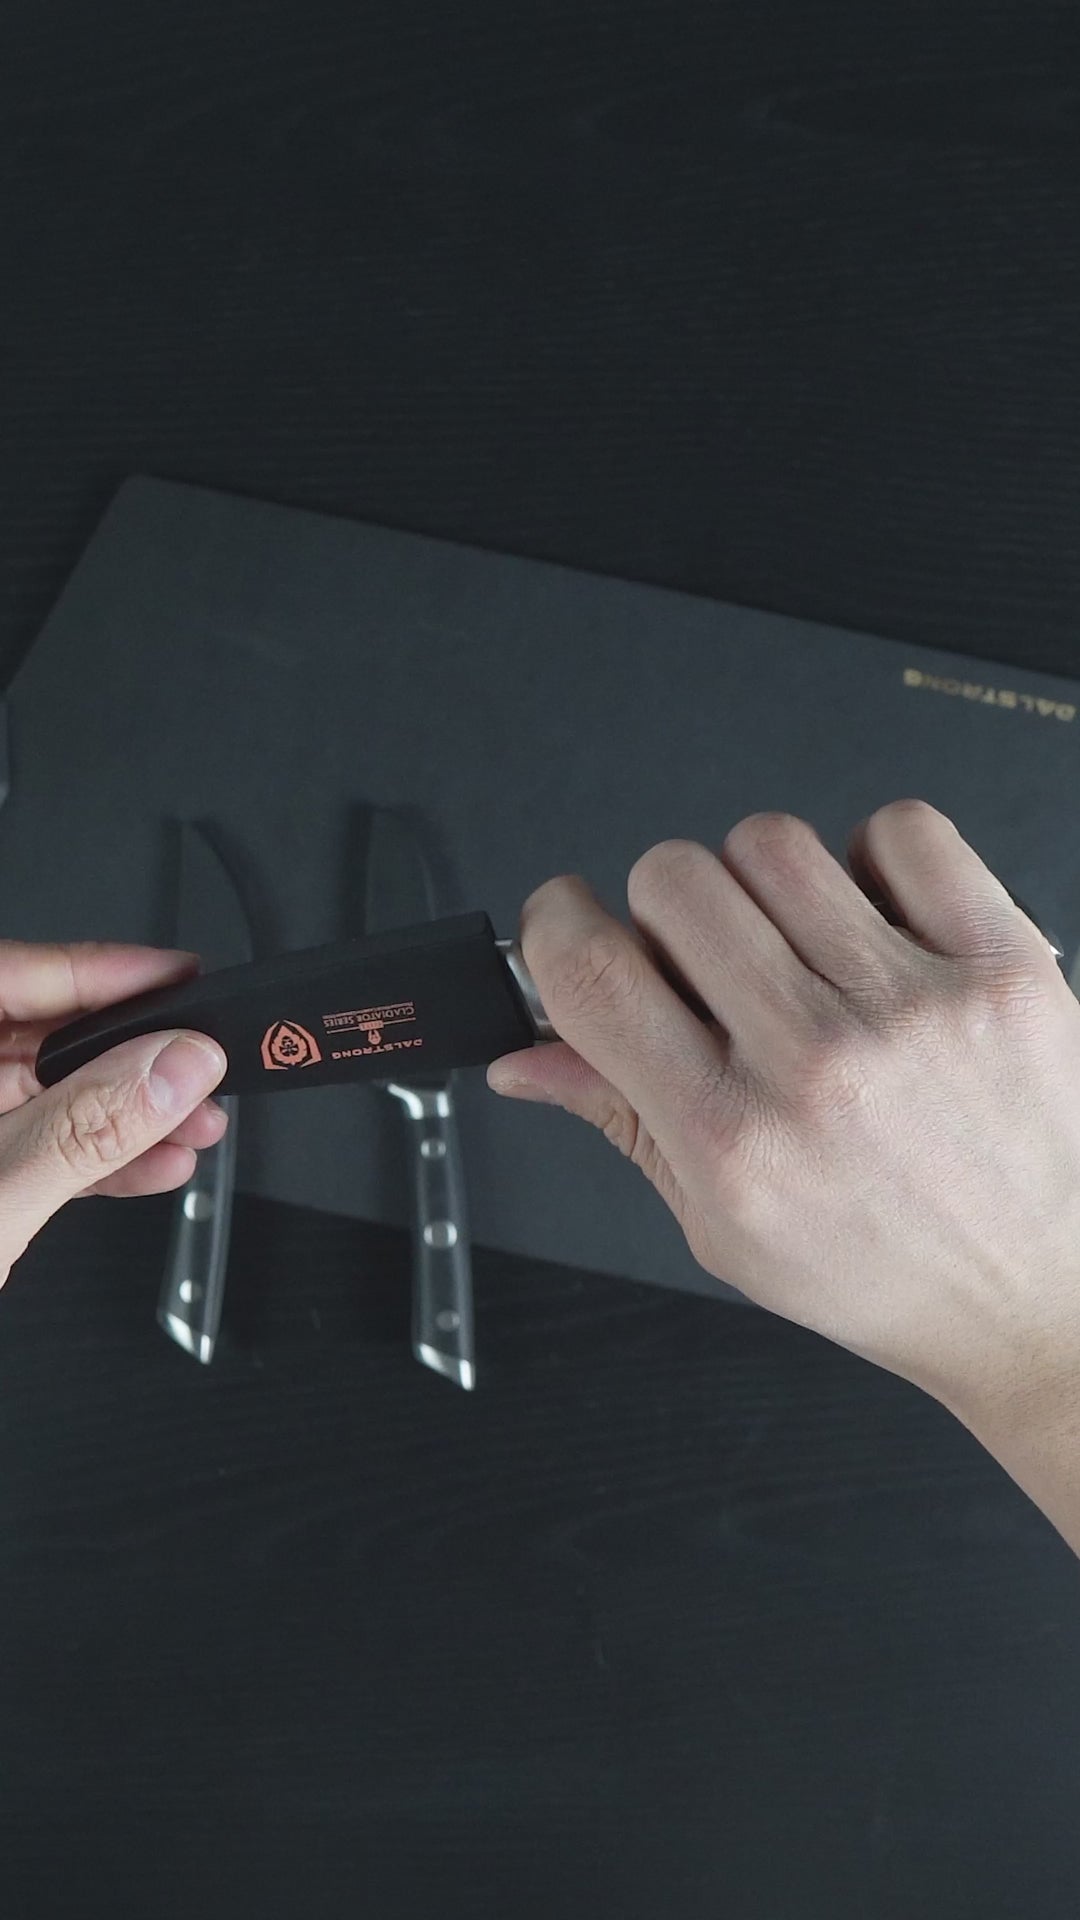 Unboxing the dalstrong gladiator series 3 piece paring knife set with black handles and sharpness test.